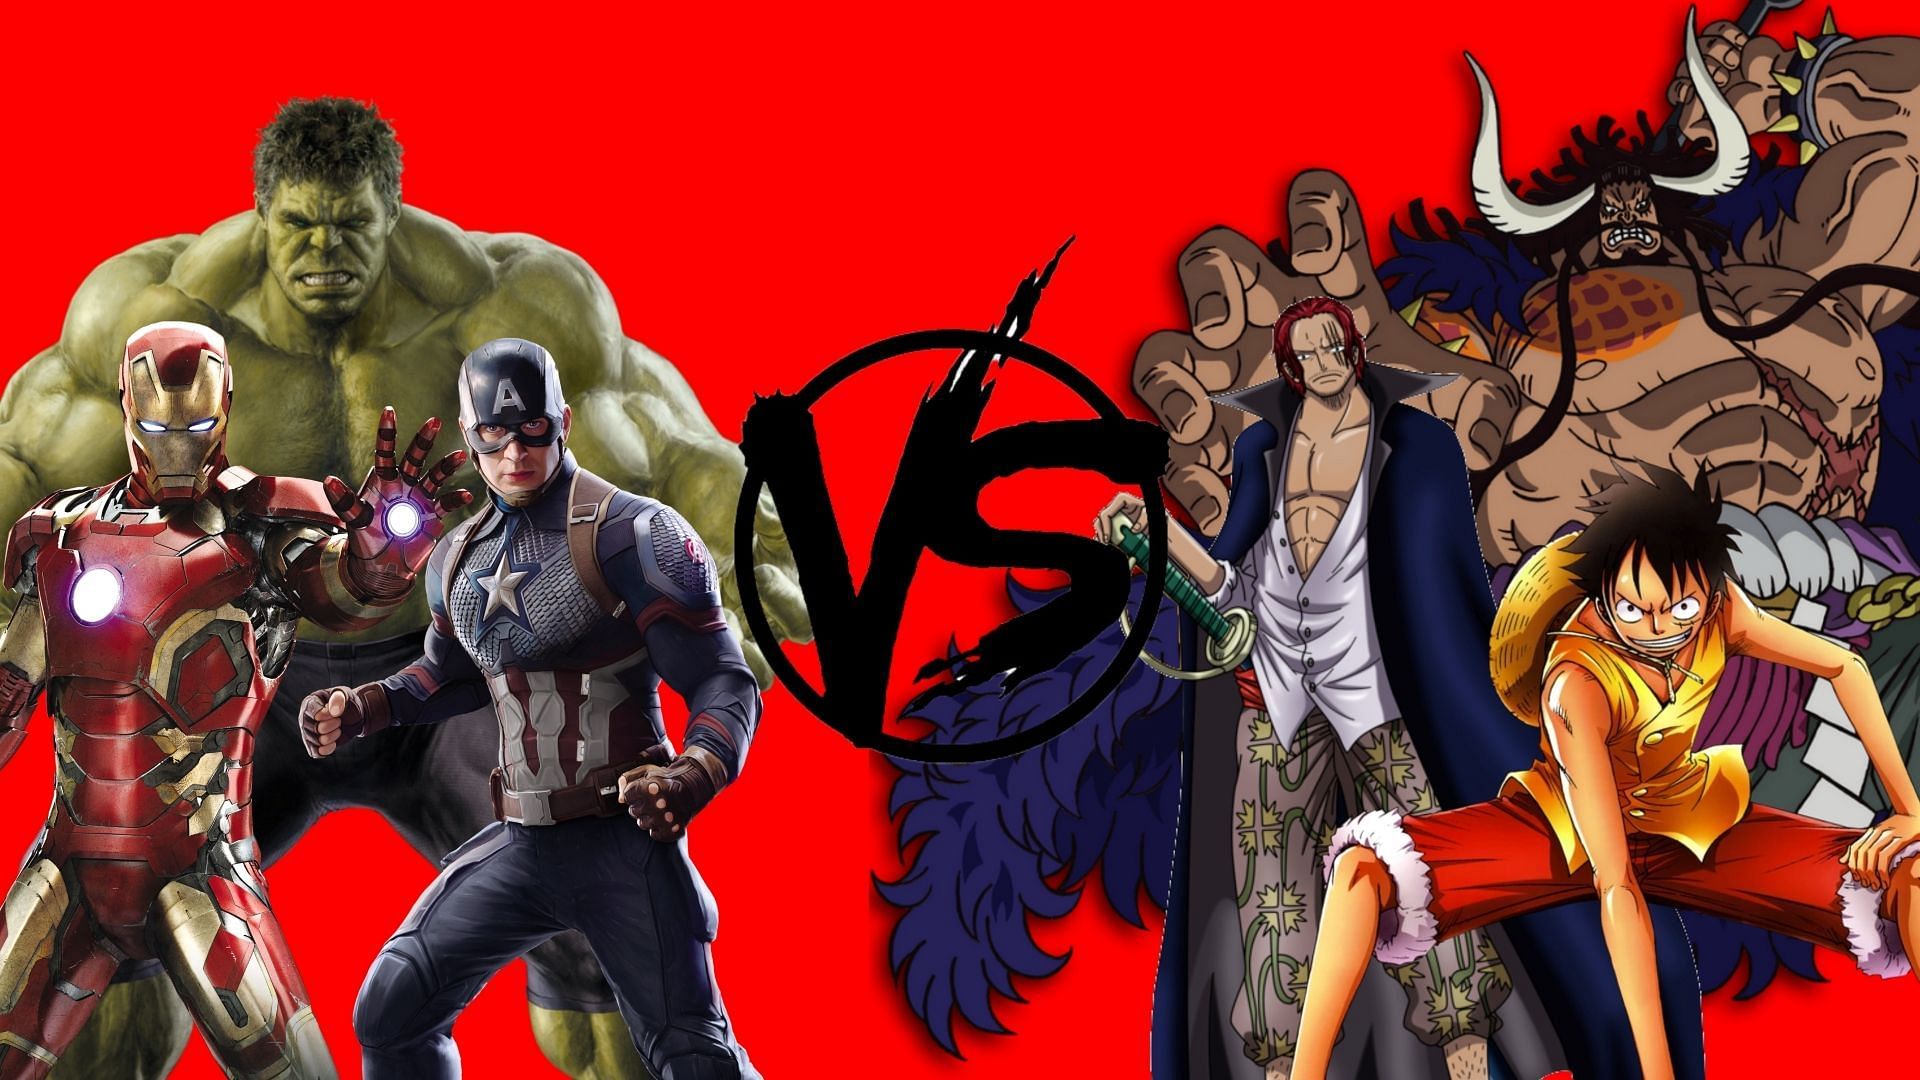 The Avengers have never faced fighters like the cast of One Piece (Image via Sportskeeda)